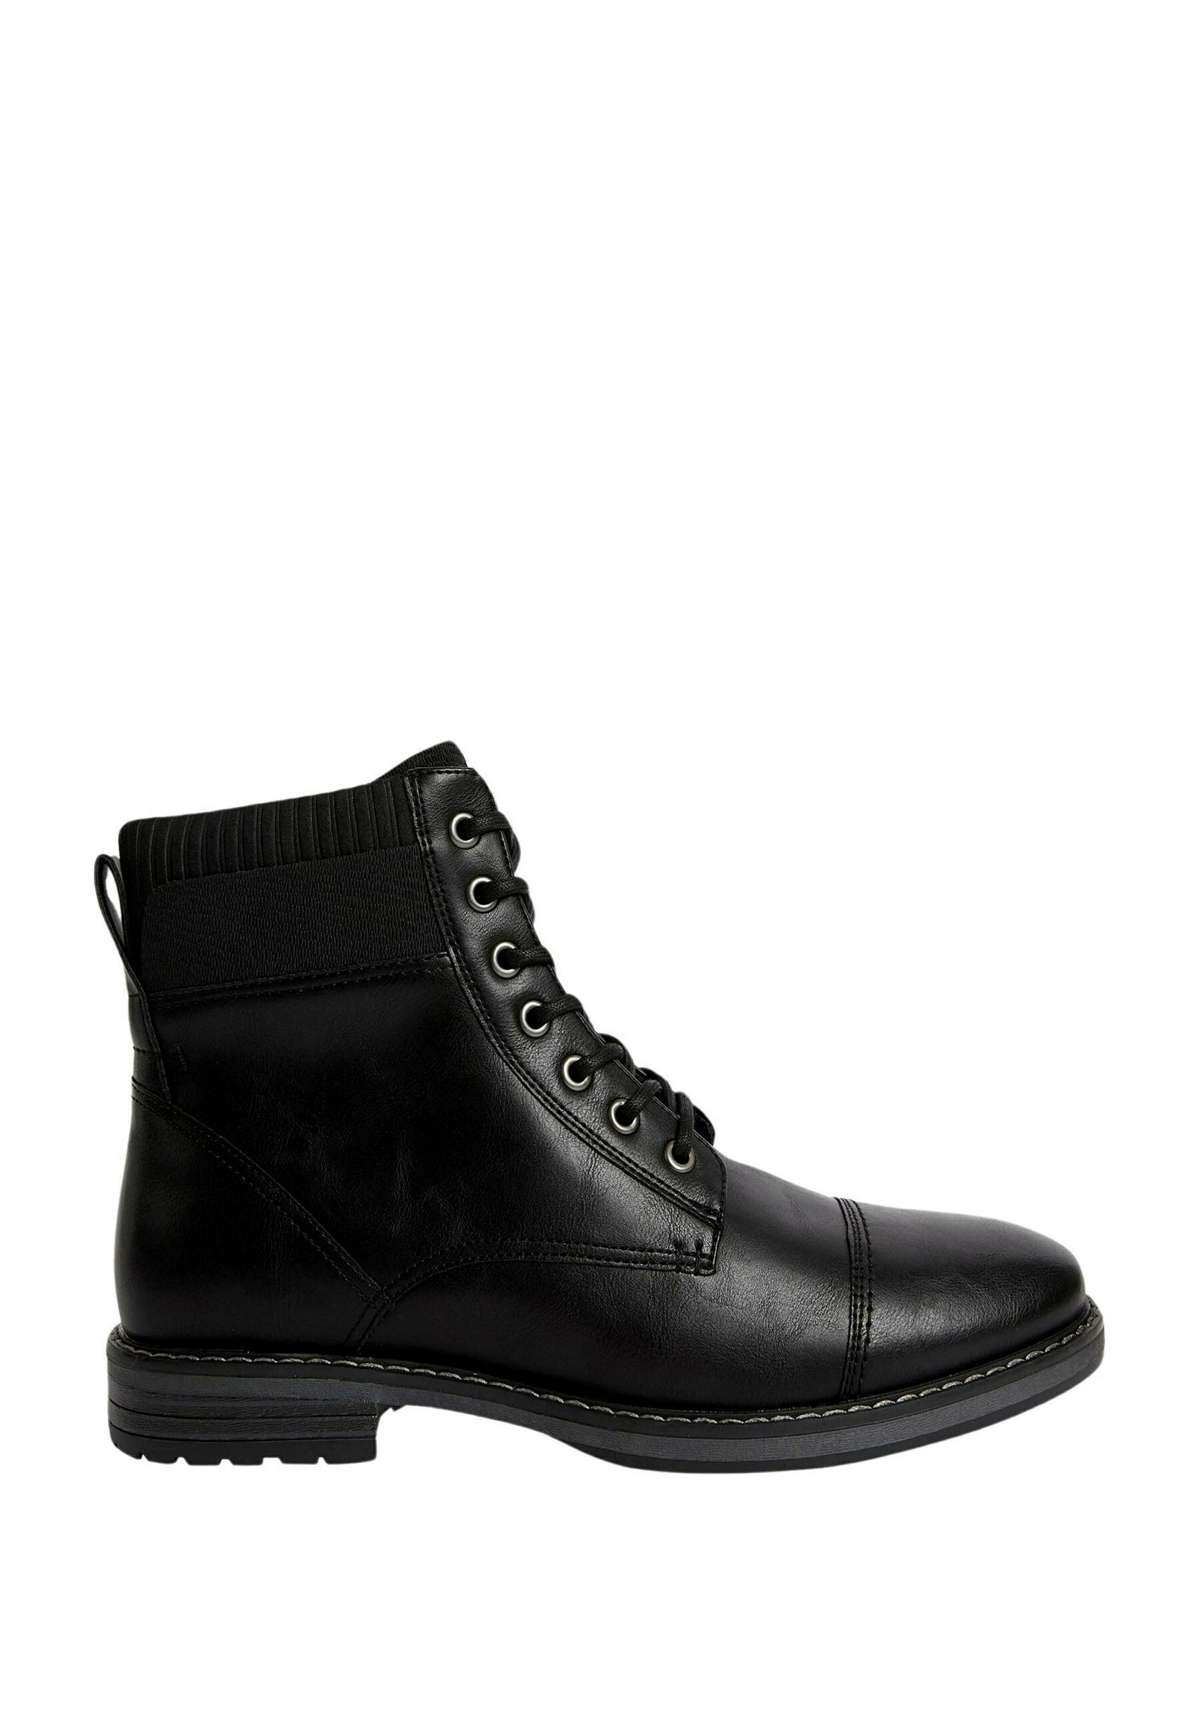 Полусапожки MILITARY SIDE ZIP CASUAL BOOTS